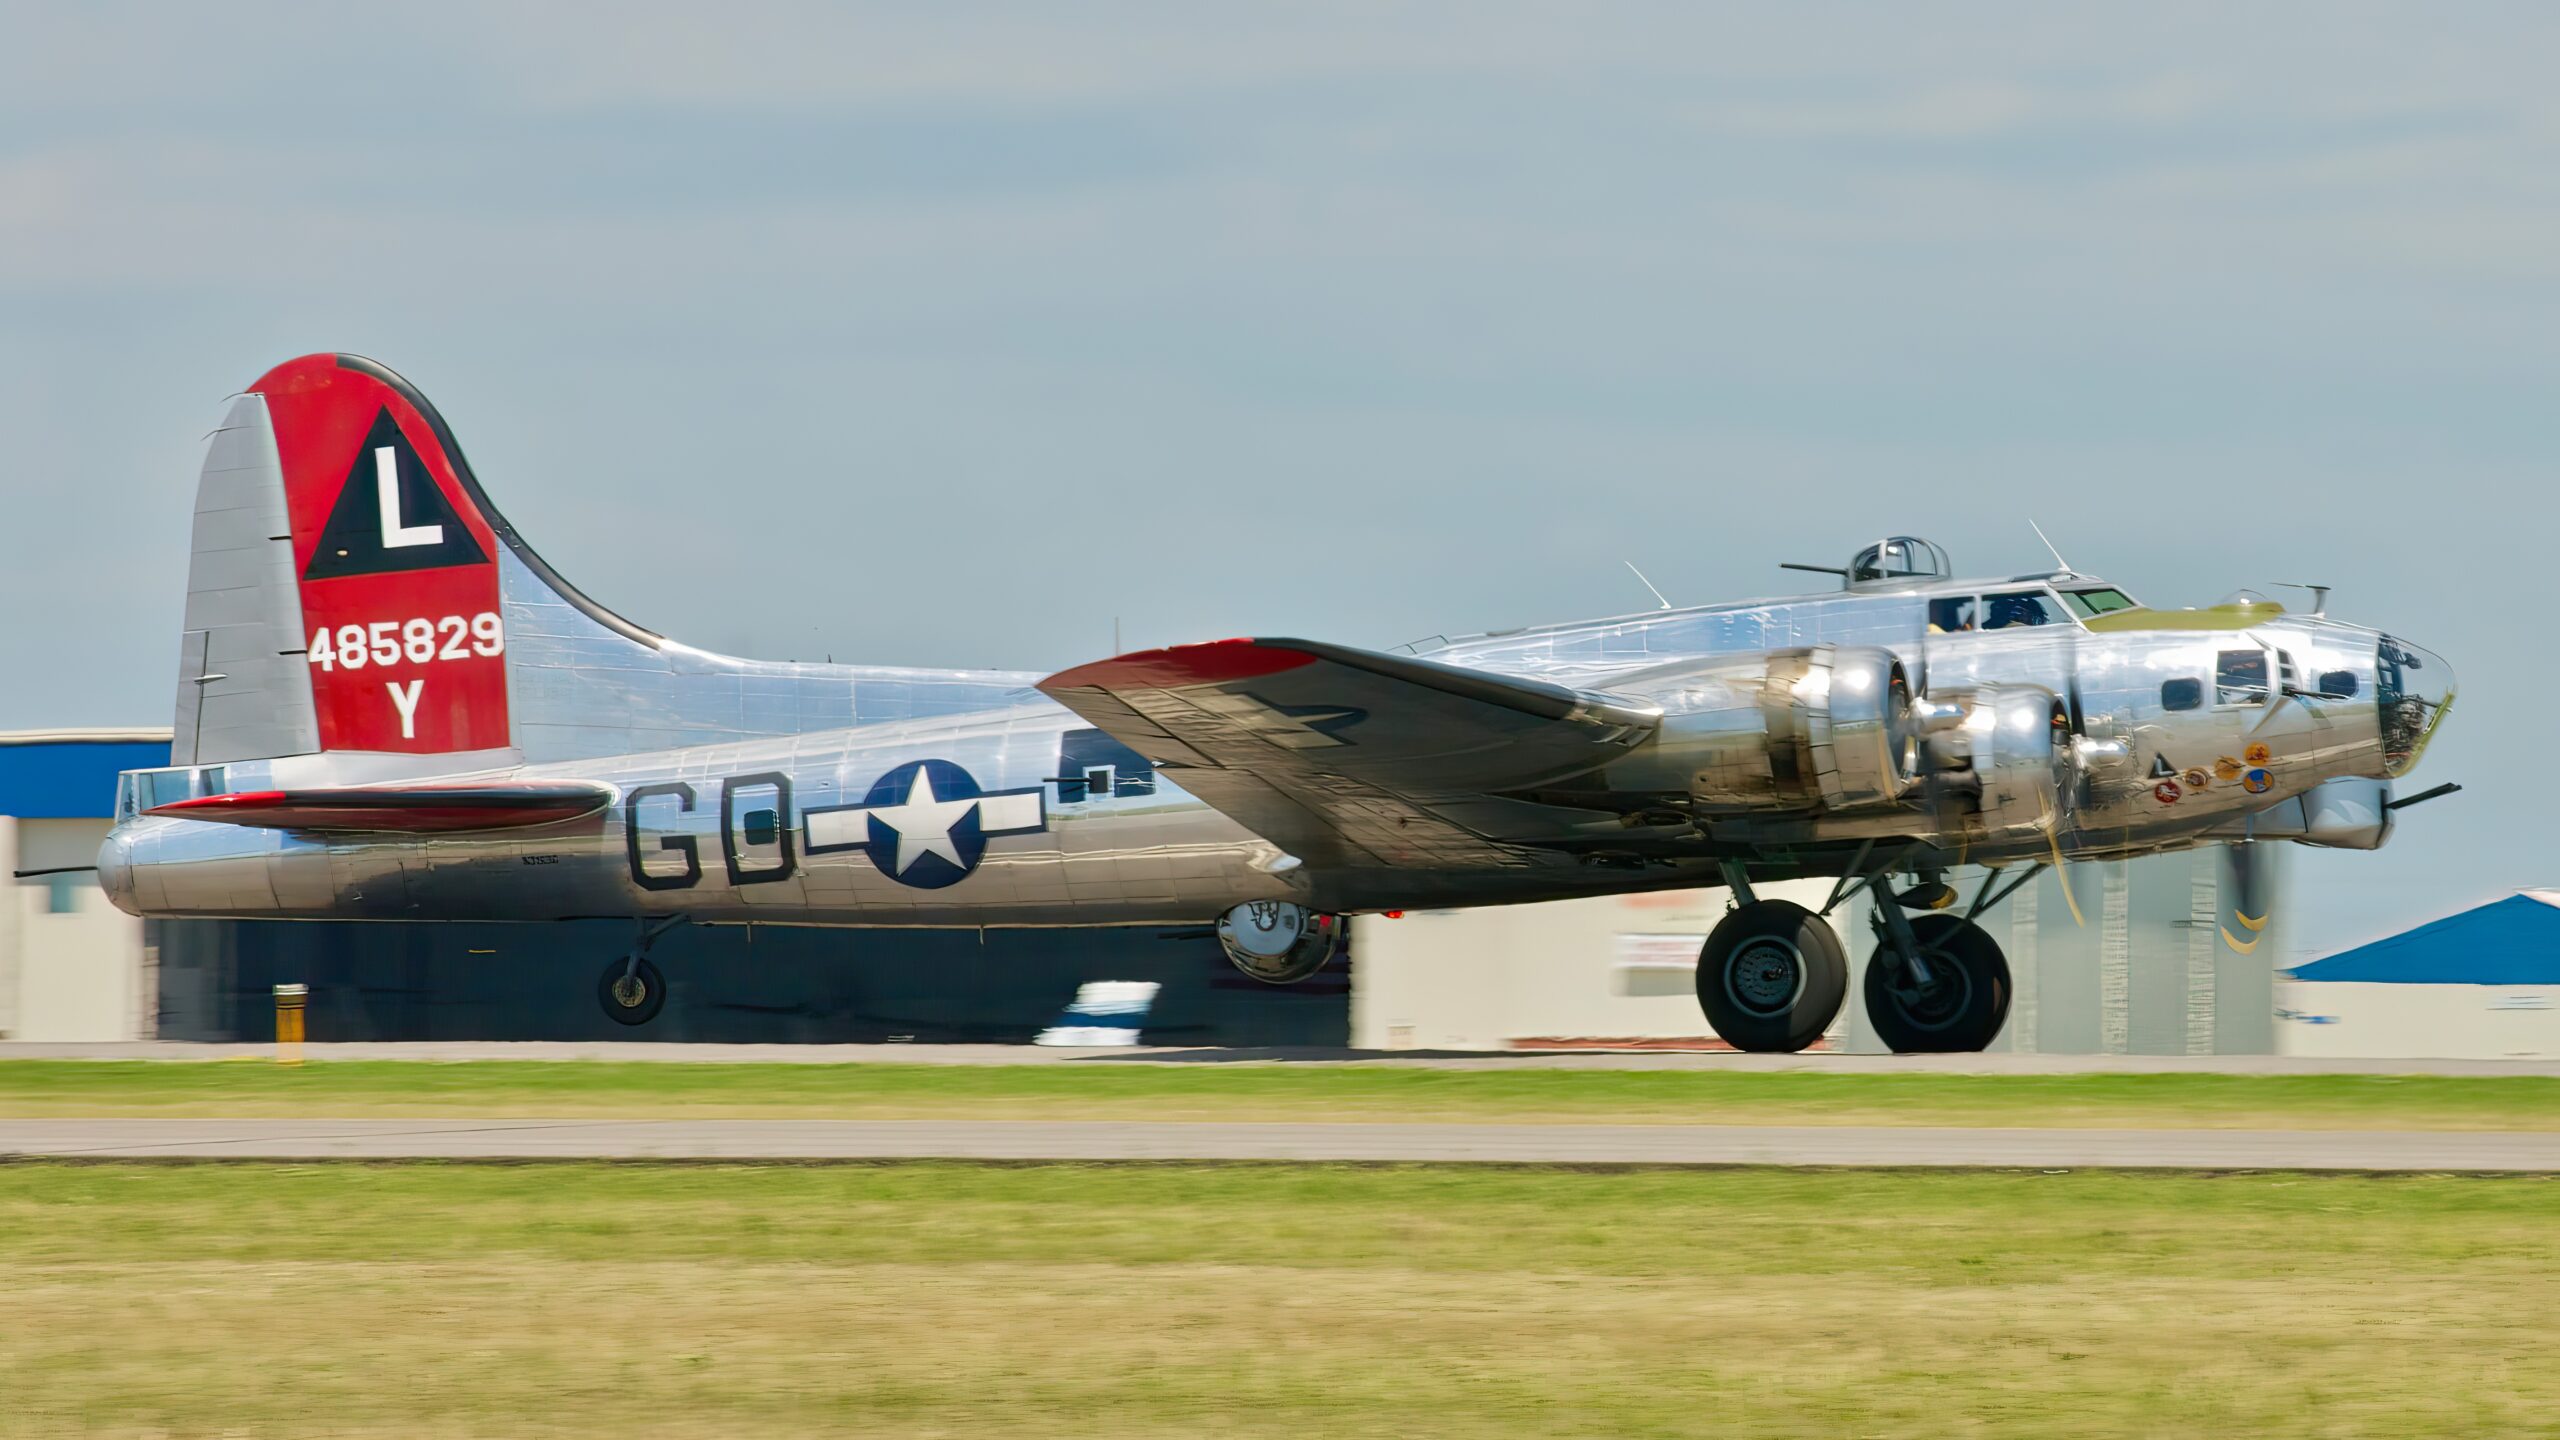 Yankee Lady is a B-17 Flying Fortress based out of Willow Run Airport in Michigan